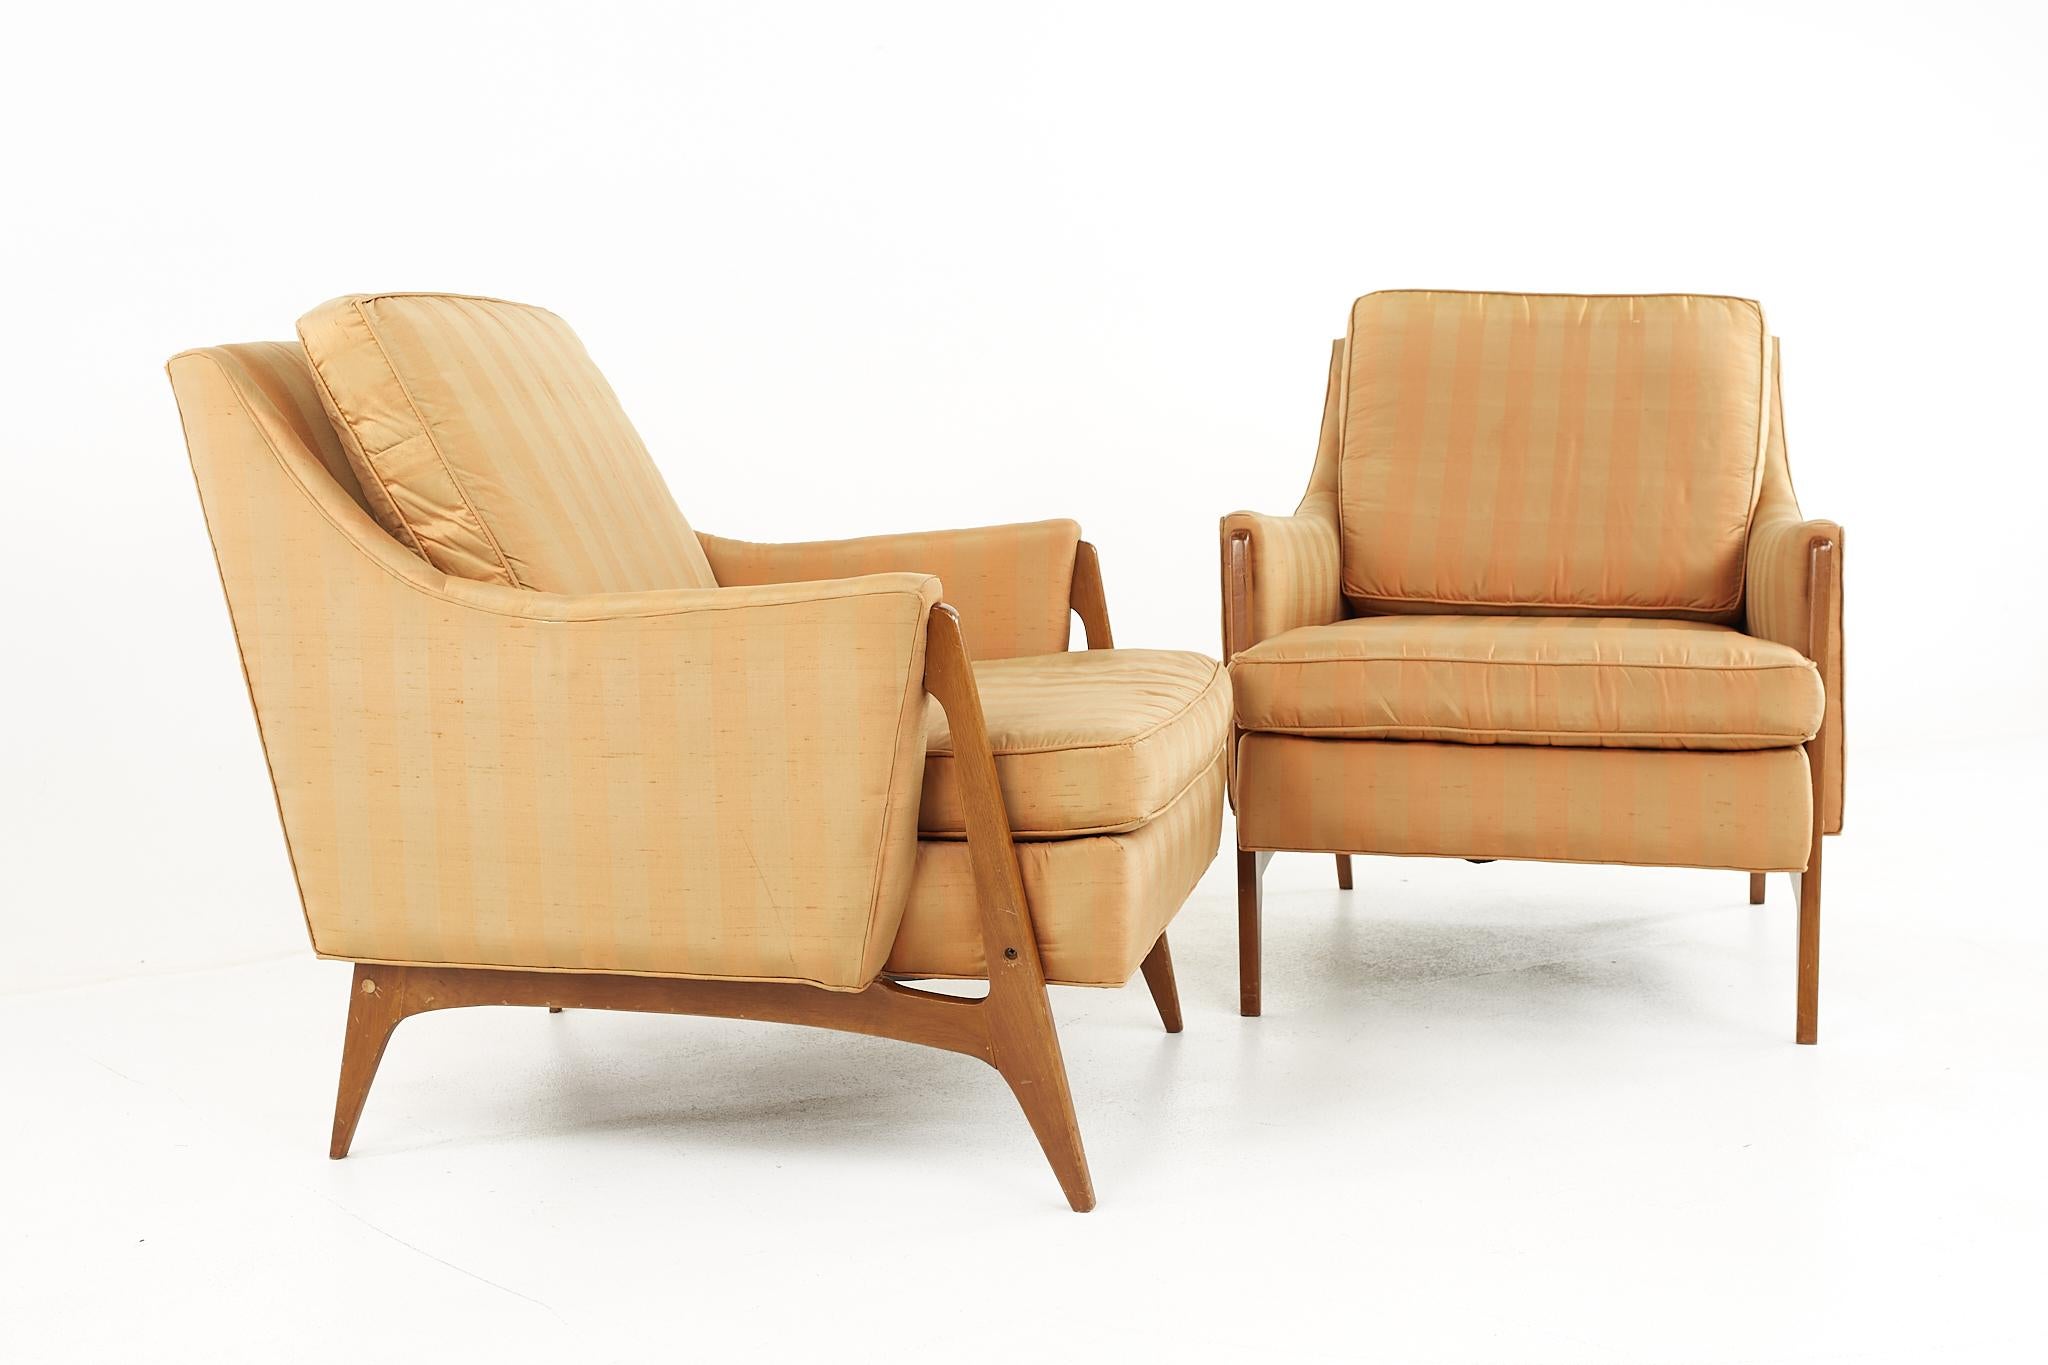 Harvey Probber style mid-century walnut lounge chairs - a pair

Each chair measures: 28.5 wide x 33 deep x 31 high, with a seat height of 17 and arm height of 22.5 inches.

All pieces of furniture can be had in what we call restored vintage